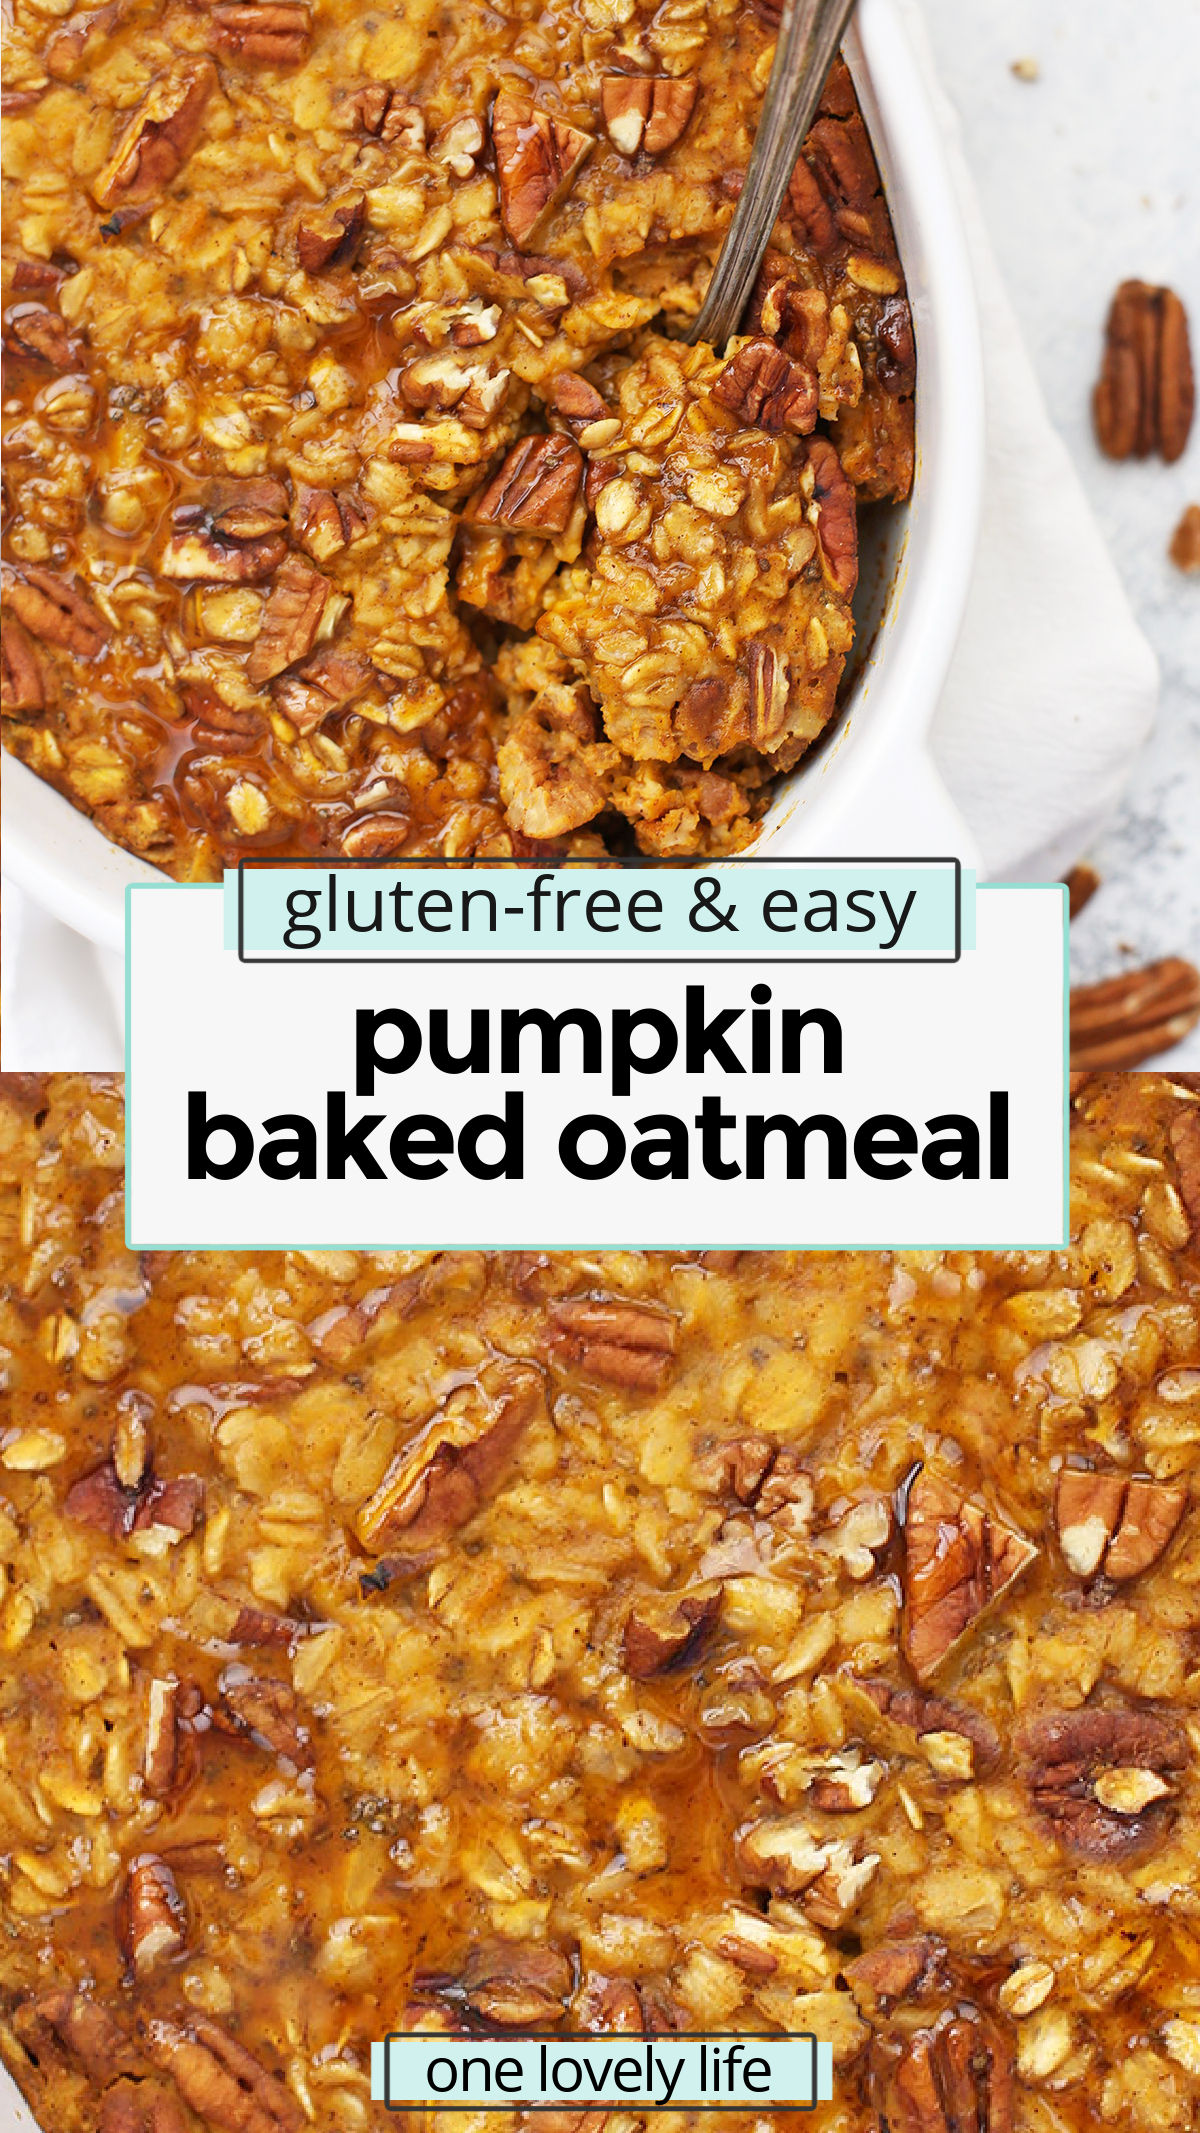 Baked Pumpkin Oatmeal - Studded with pecans and laced with the perfect blend of warm spices, this cozy pumpkin baked oatmeal recipe hits all the right notes! (Gluten free, vegan-friendly) // Pumpkin Oatmeal Recipe // Fall Breakfast // Healthy Pumpkin Recipes // Gluten-Free Breakfast // Healthy Breakfast // Vegan Breakfast // Pumpkin Breakfast Recipes // pumpkin oatmeal // baked oatmeal recipes